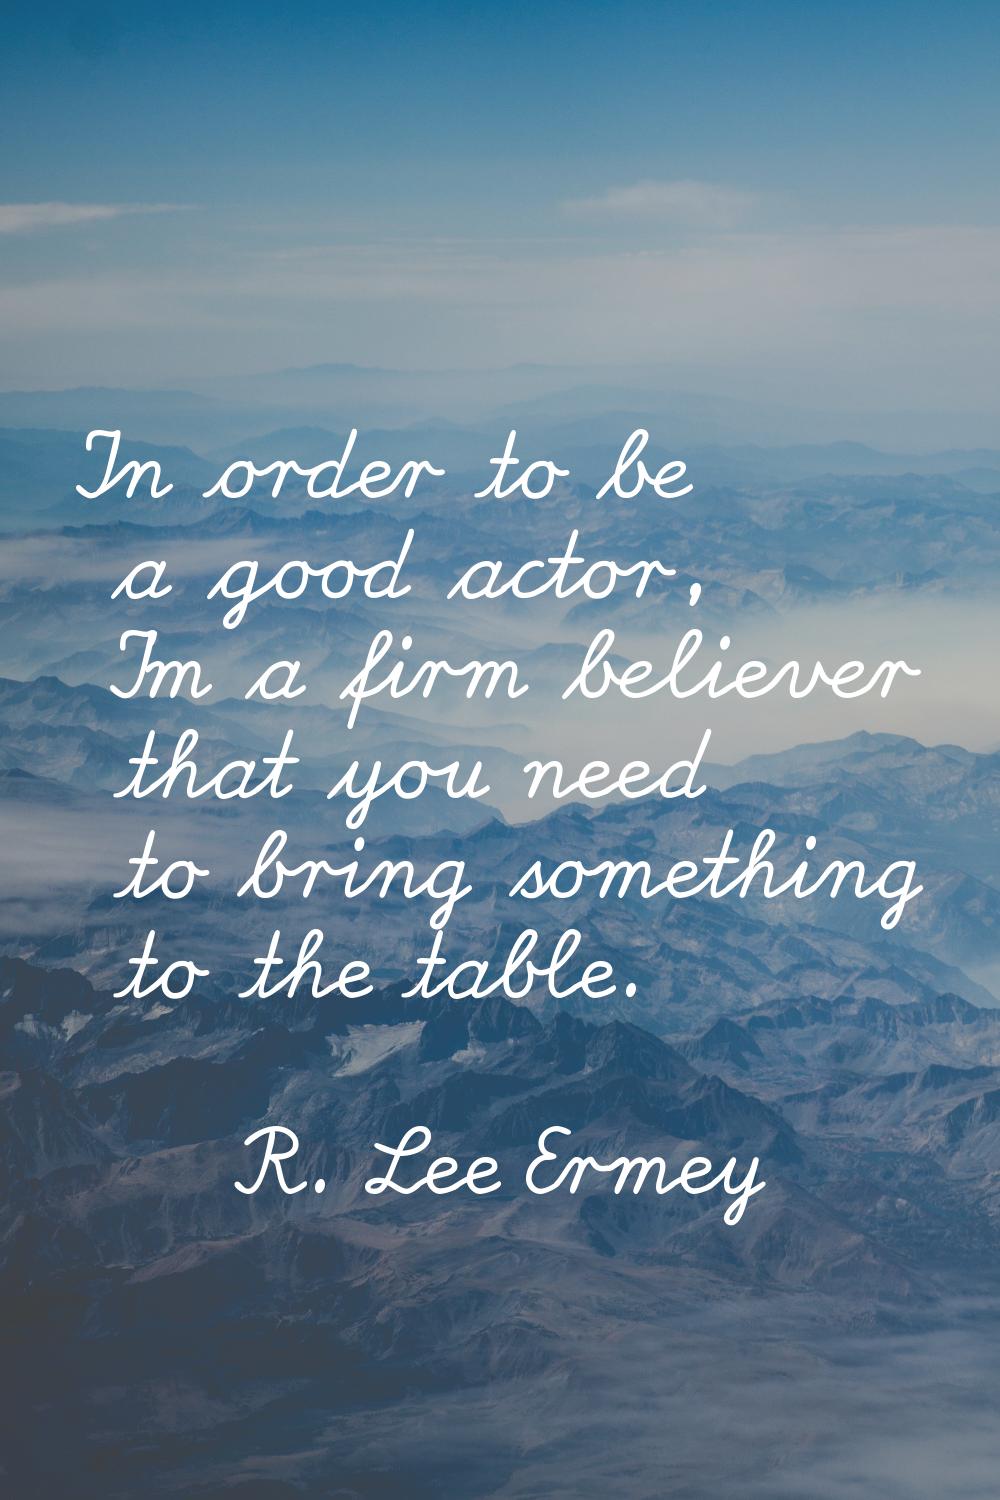 In order to be a good actor, I'm a firm believer that you need to bring something to the table.